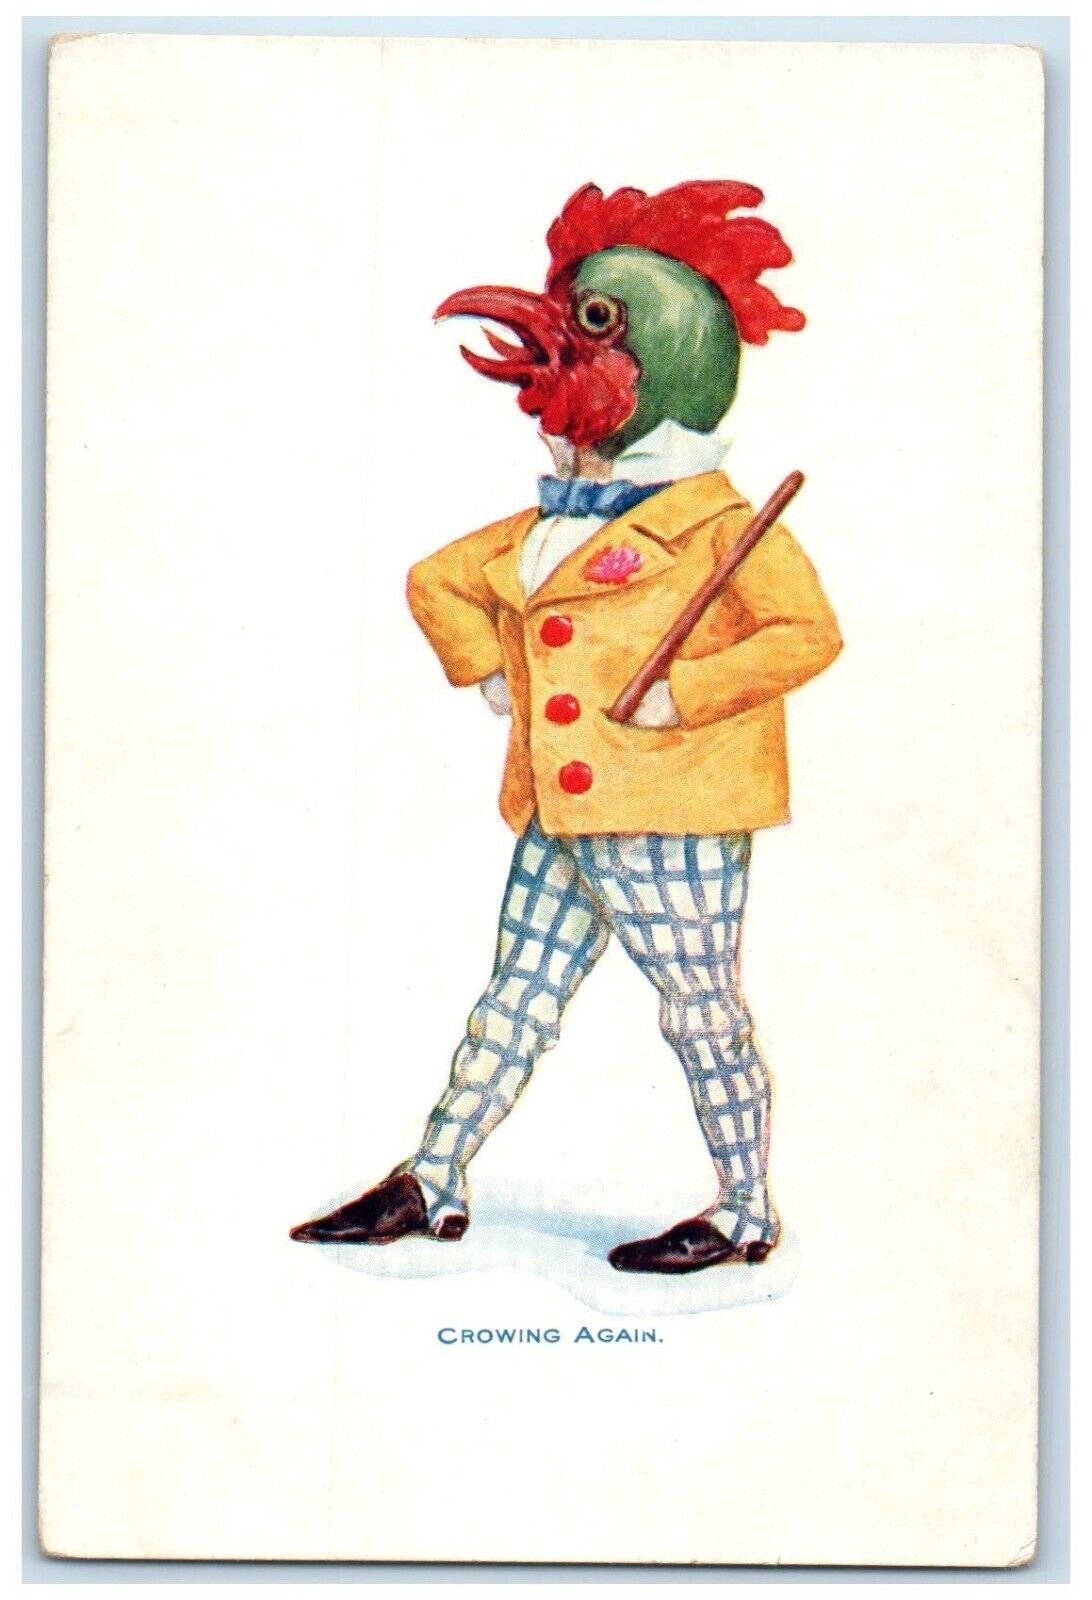 c1905 Man Wearing Rooster Head Costume Crowning Again Unposted Antique Postcard